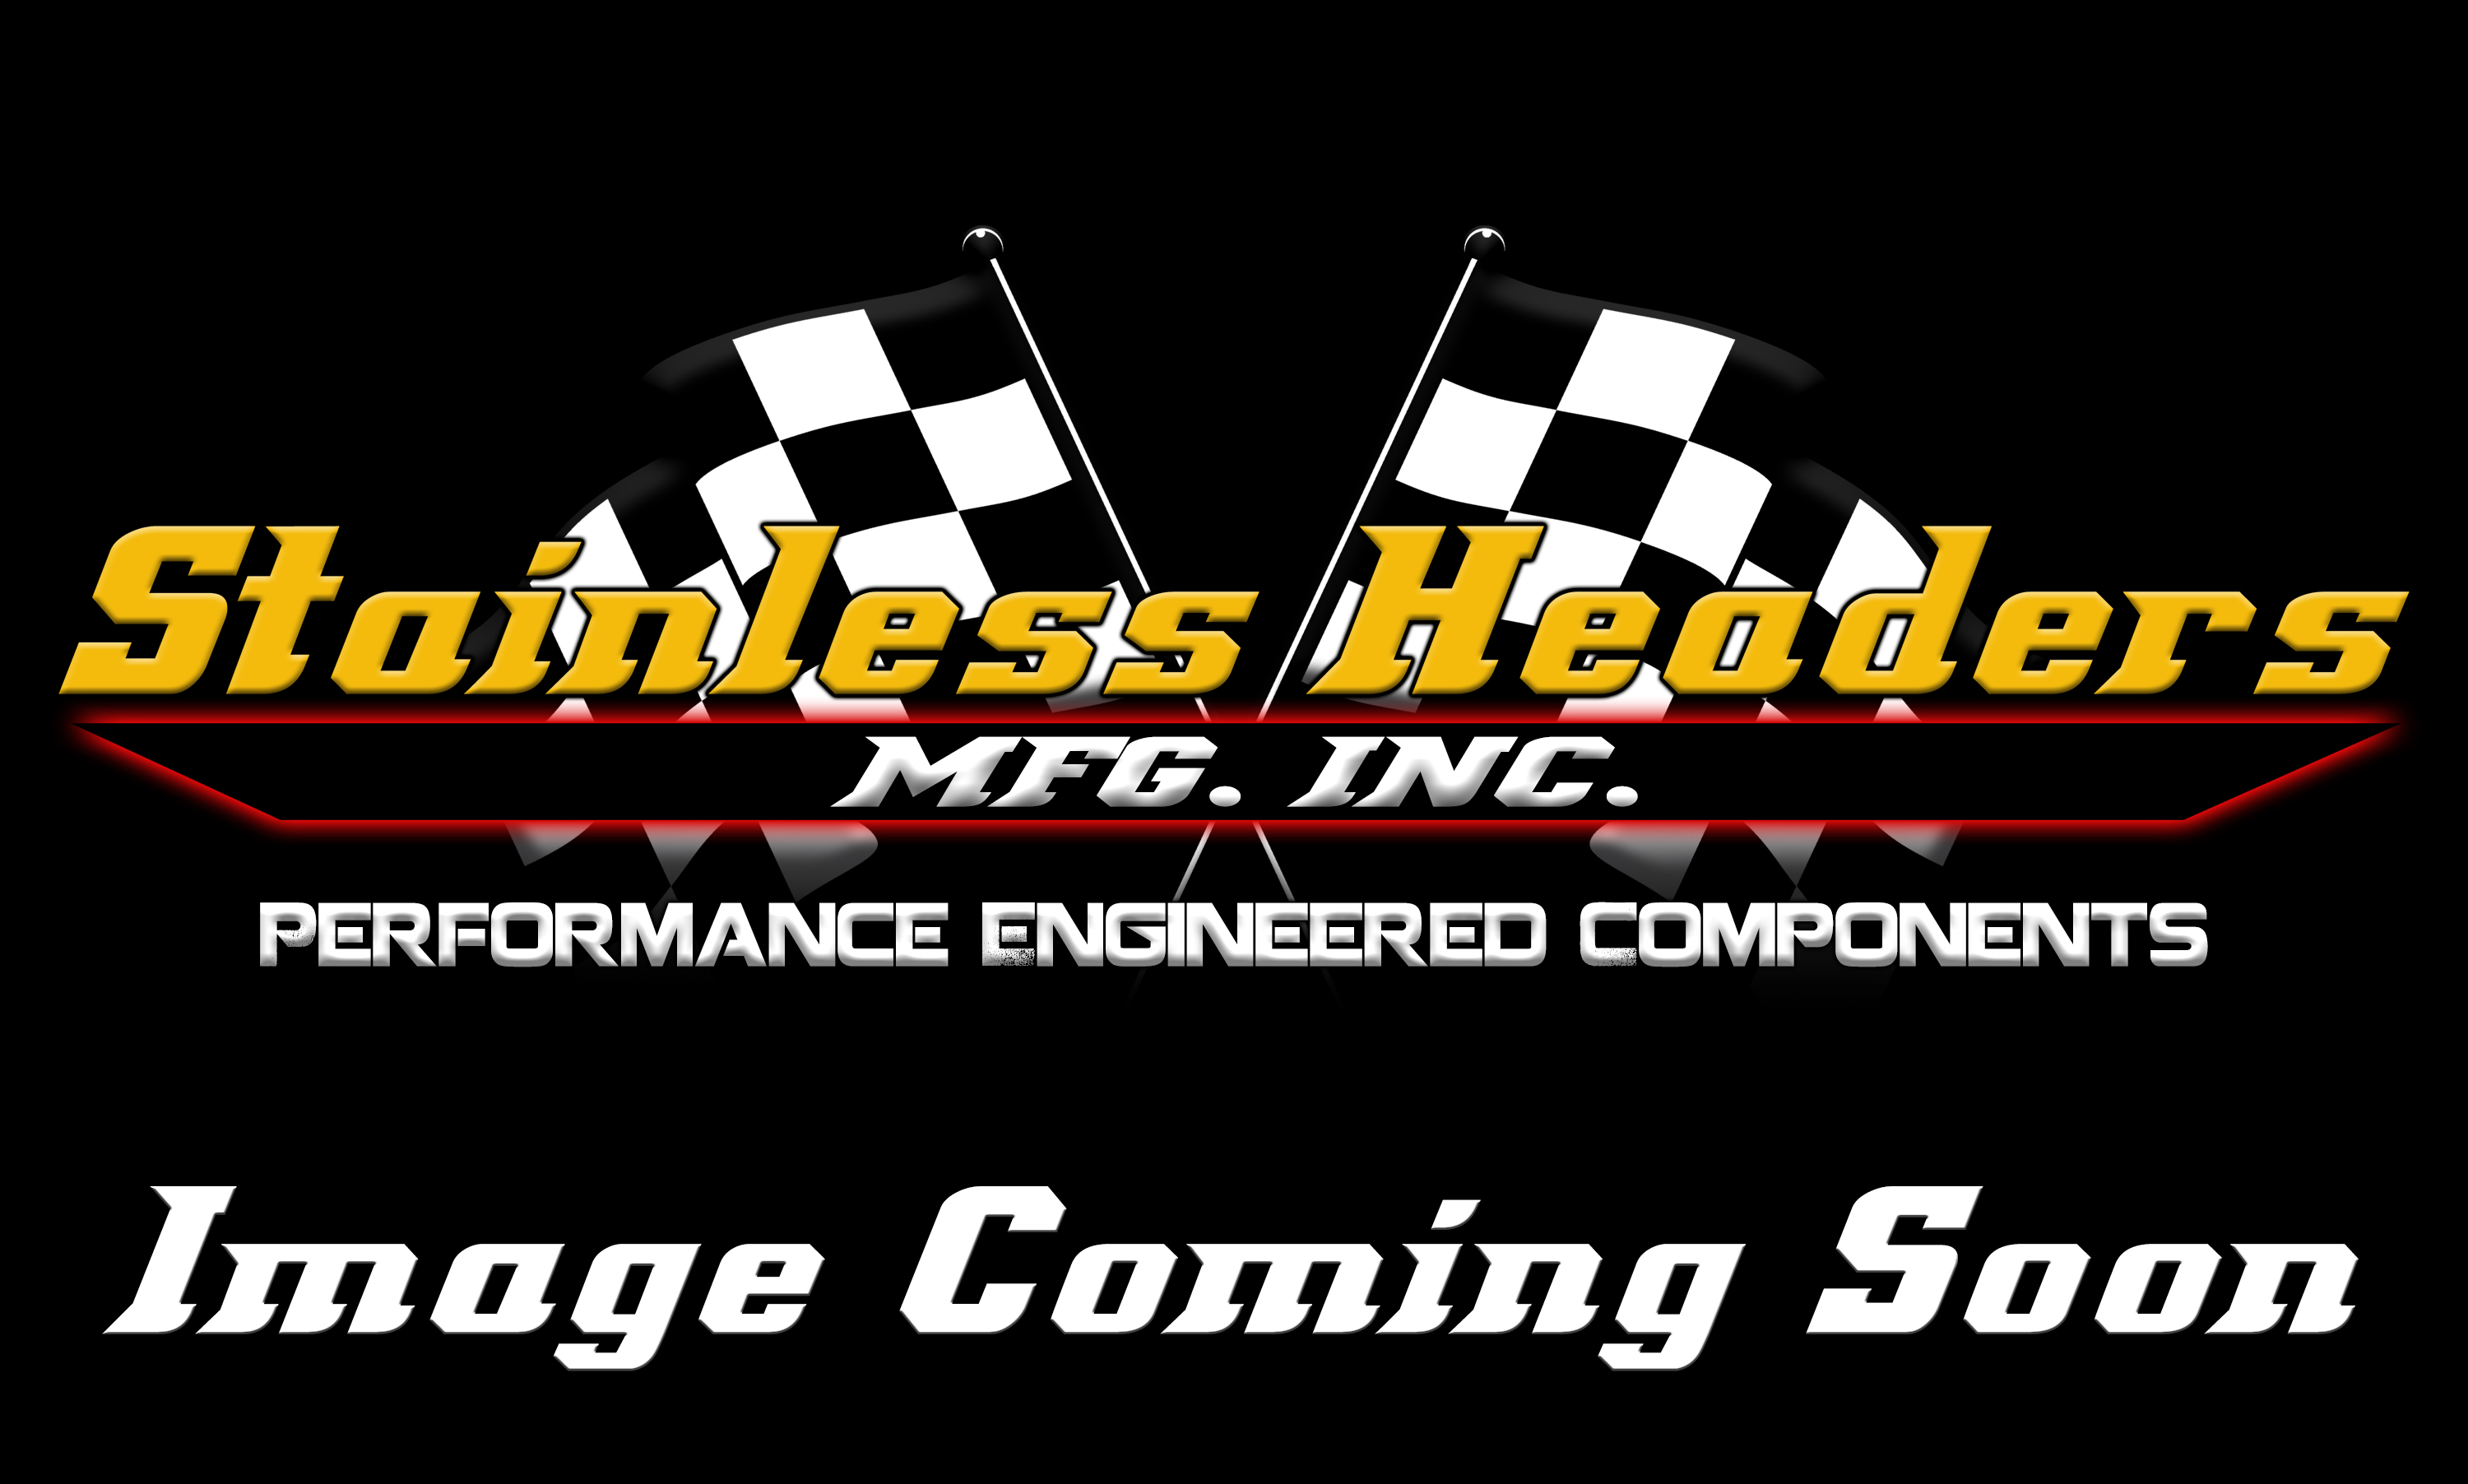 CompTurbo Technologies - CTR4518R-8388 Mid Frame 360 Journal Bearing Turbocharger (1500 HP) - Image 3